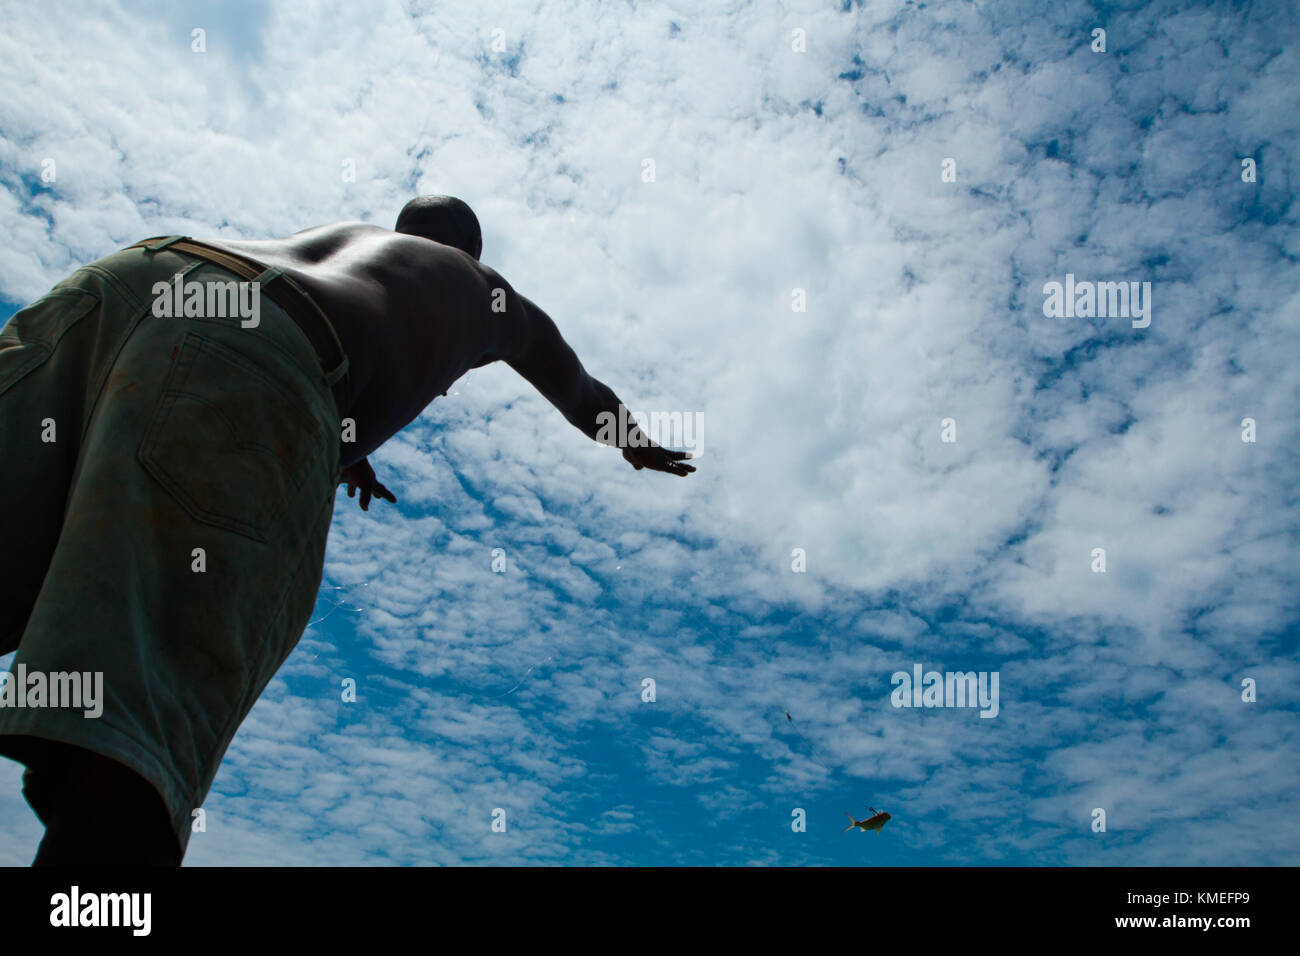 View from below of shirtless man casting fishing line, Isla Marisol, Belize Stock Photo